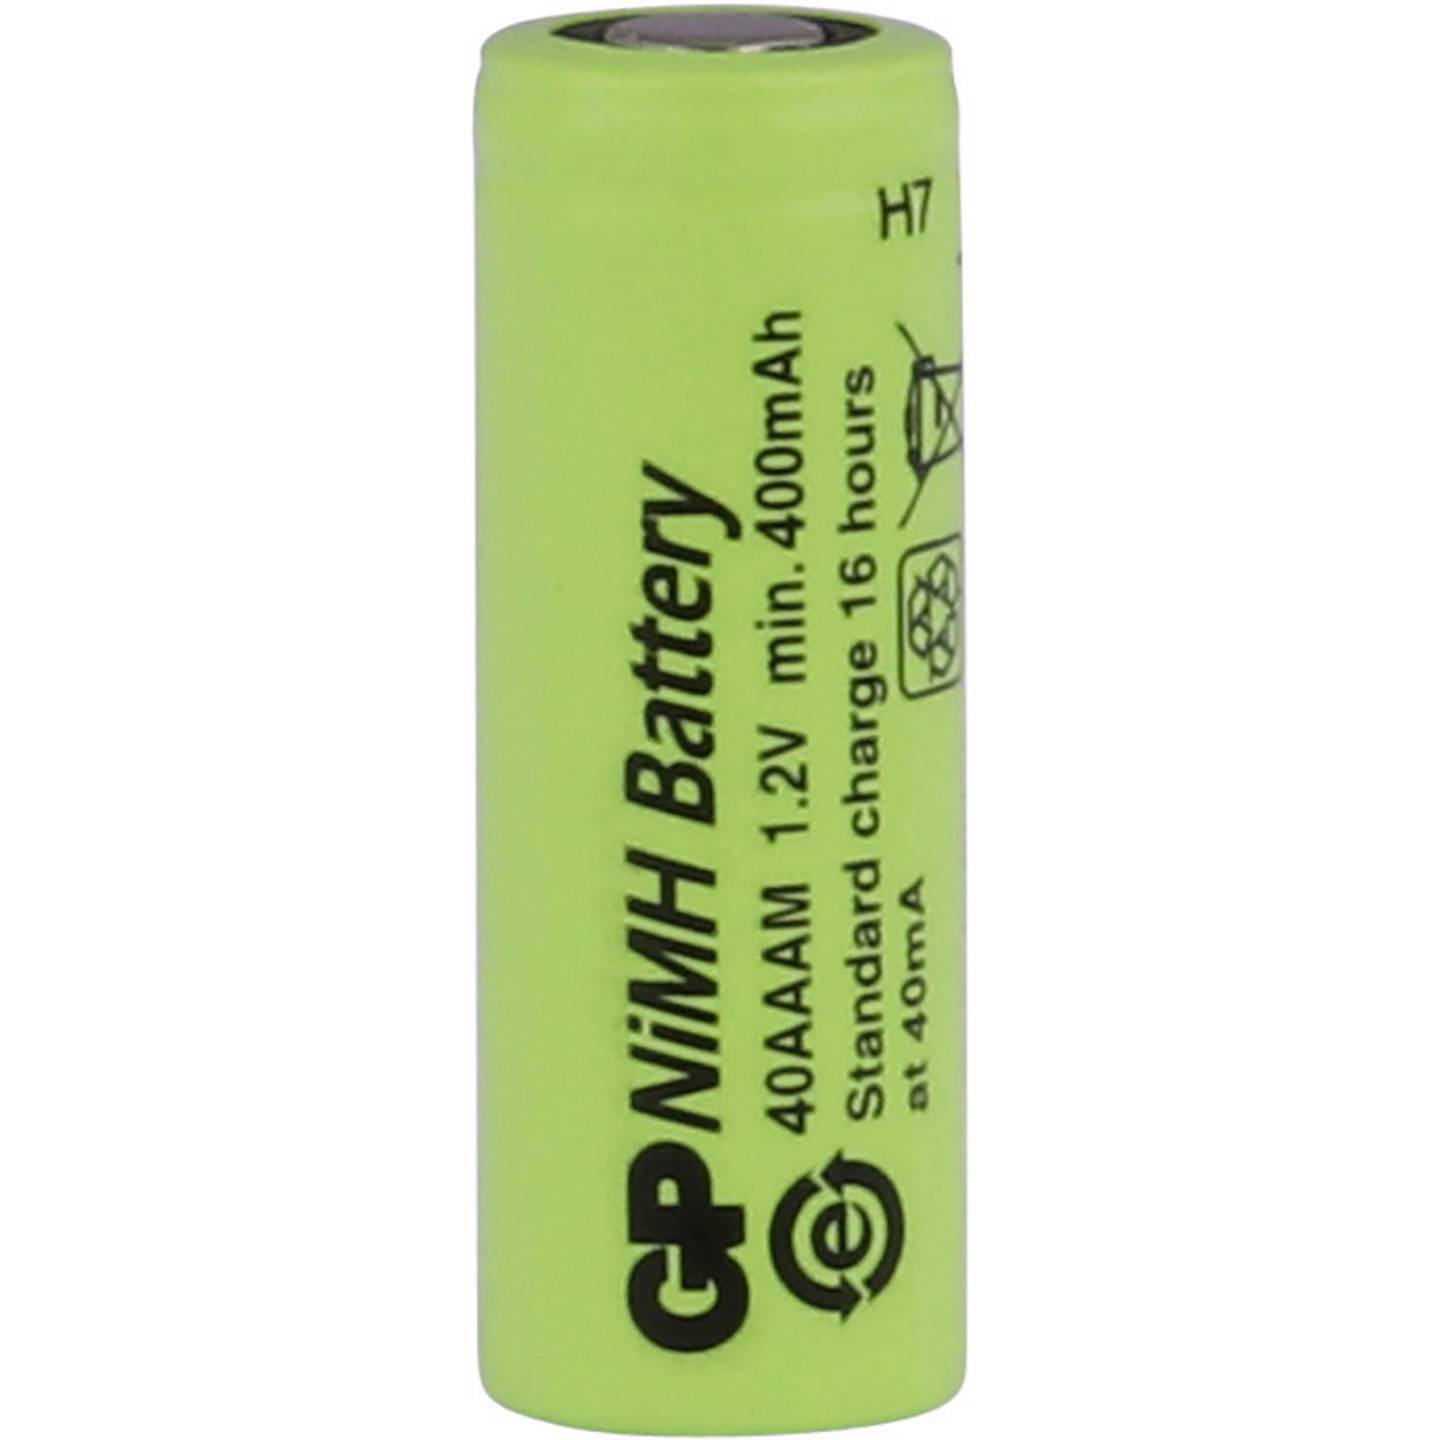 GP 2/3 AAA - 400mAh - Autres formats - NiMH - Piles rechargeables